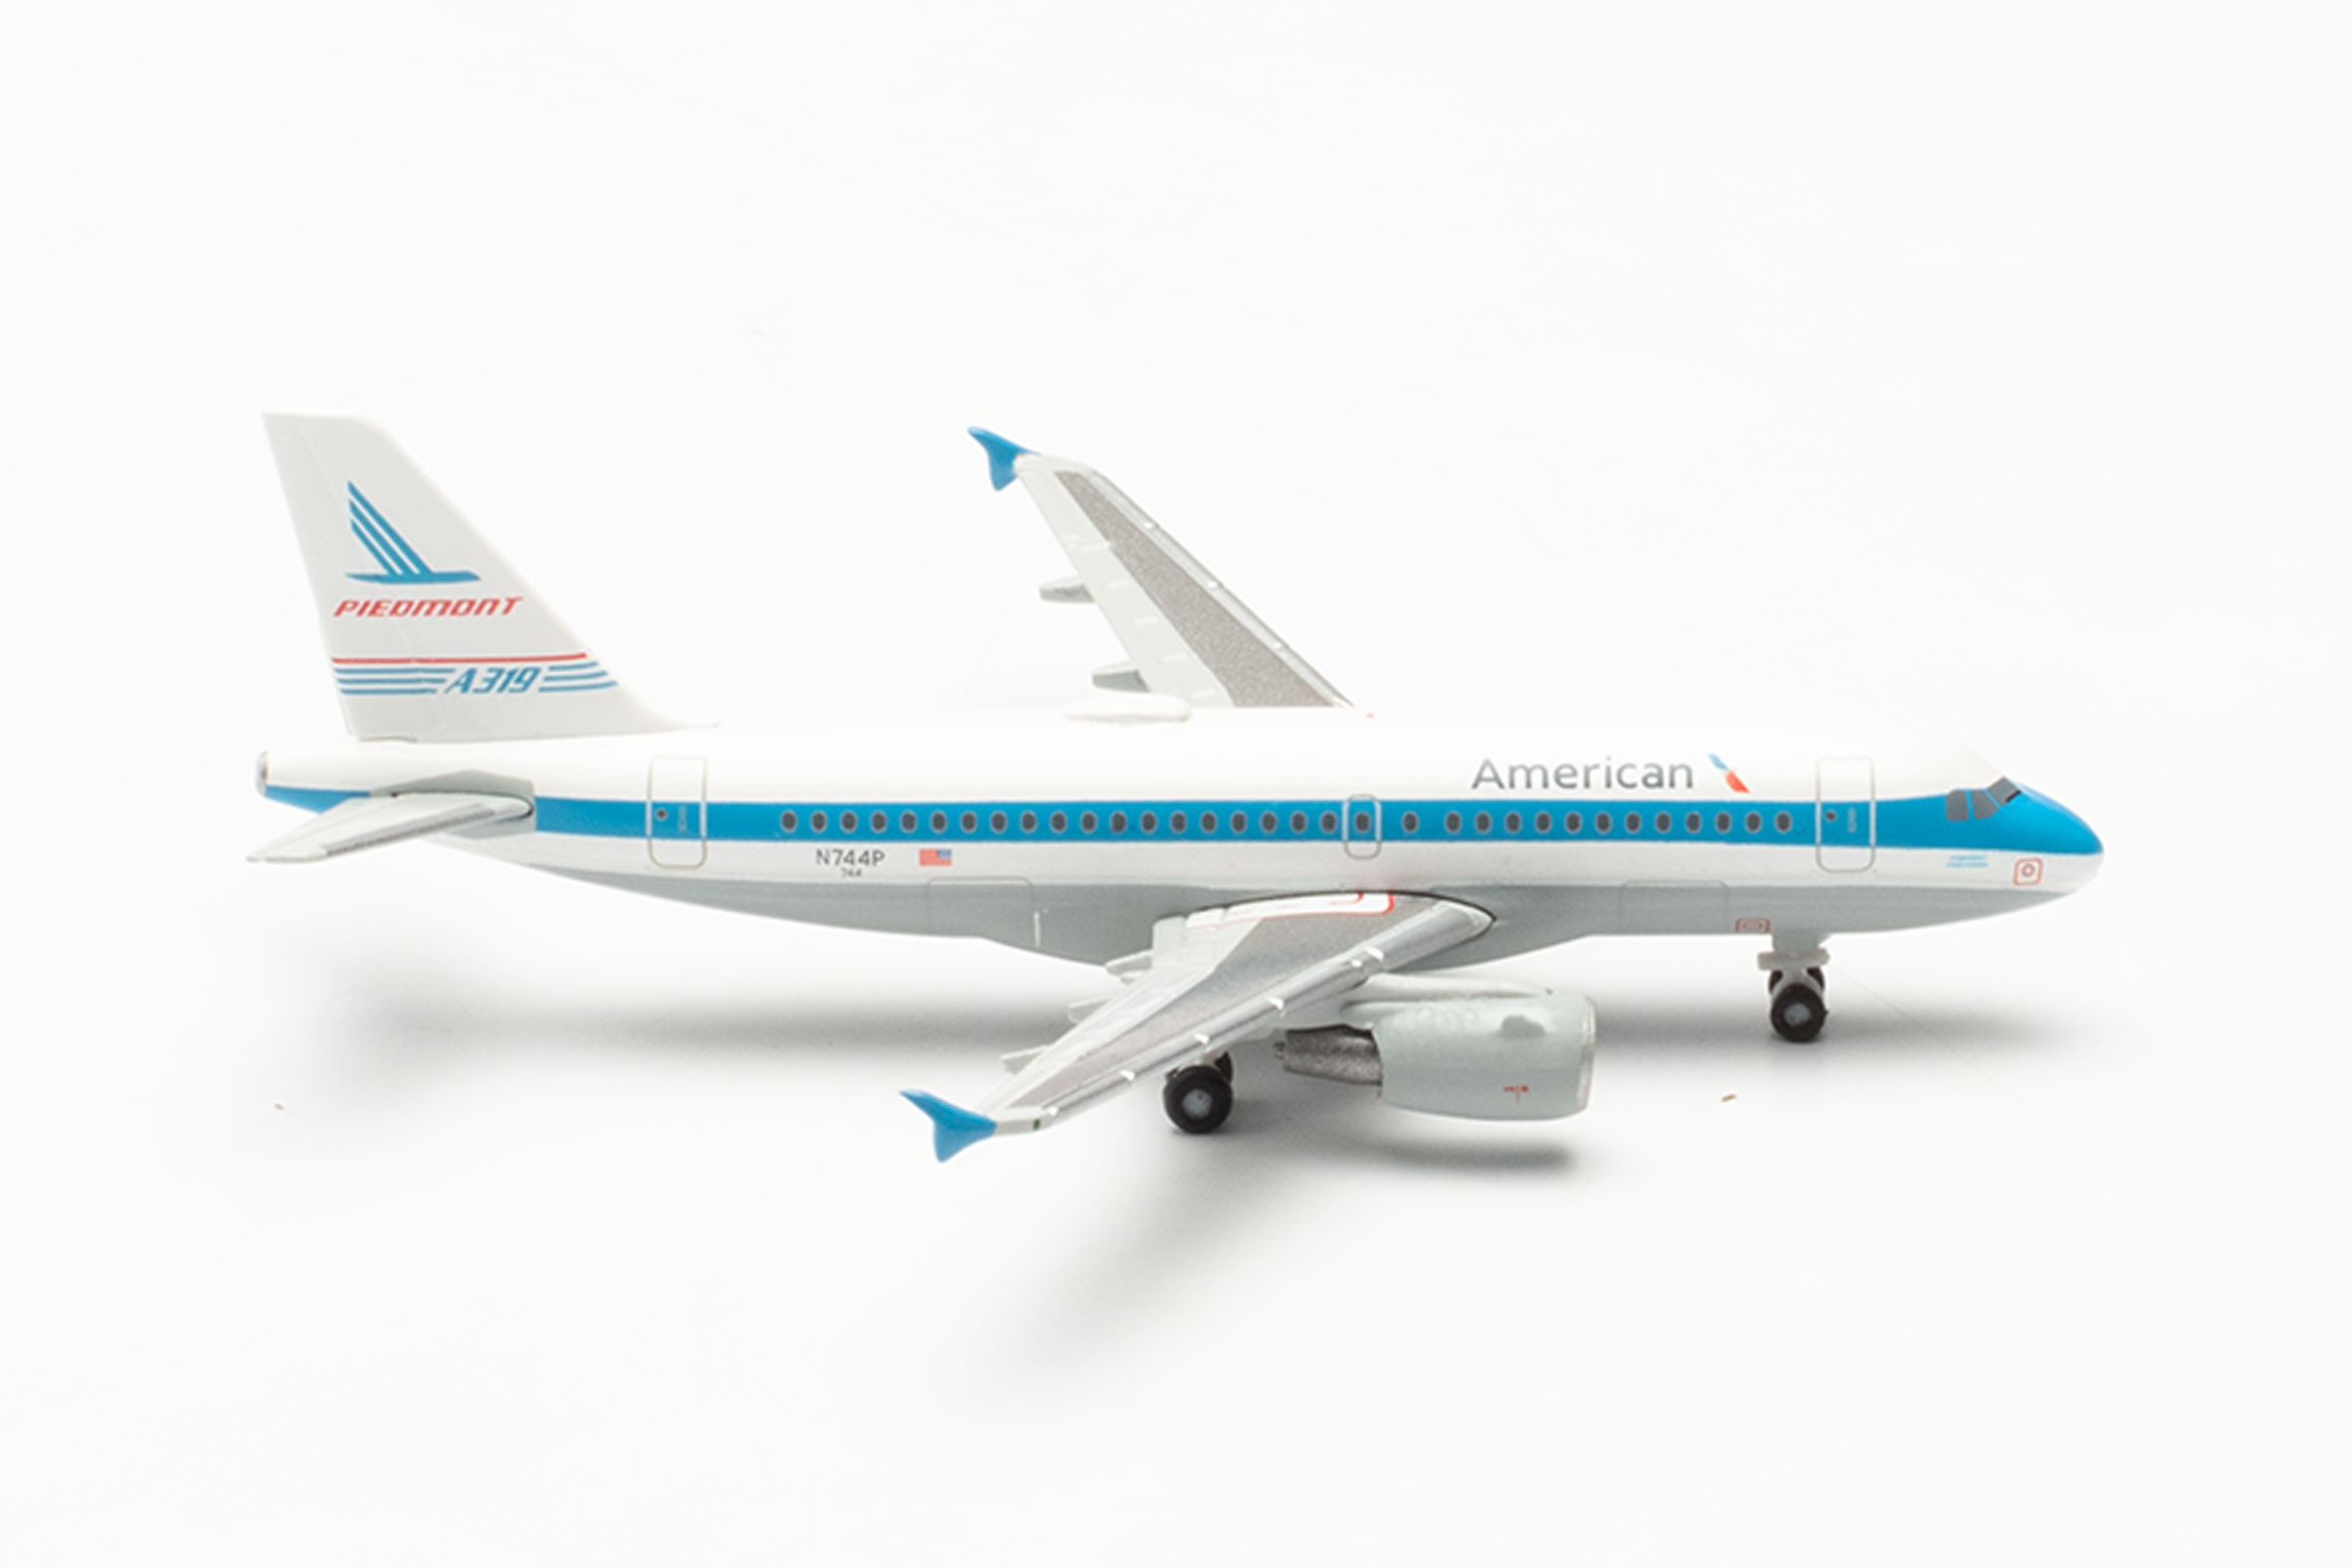 American Airlines Airbus A319 - Piedmont Heritage livery – “Piedmont Pacemaker”  - Reg.: N744P